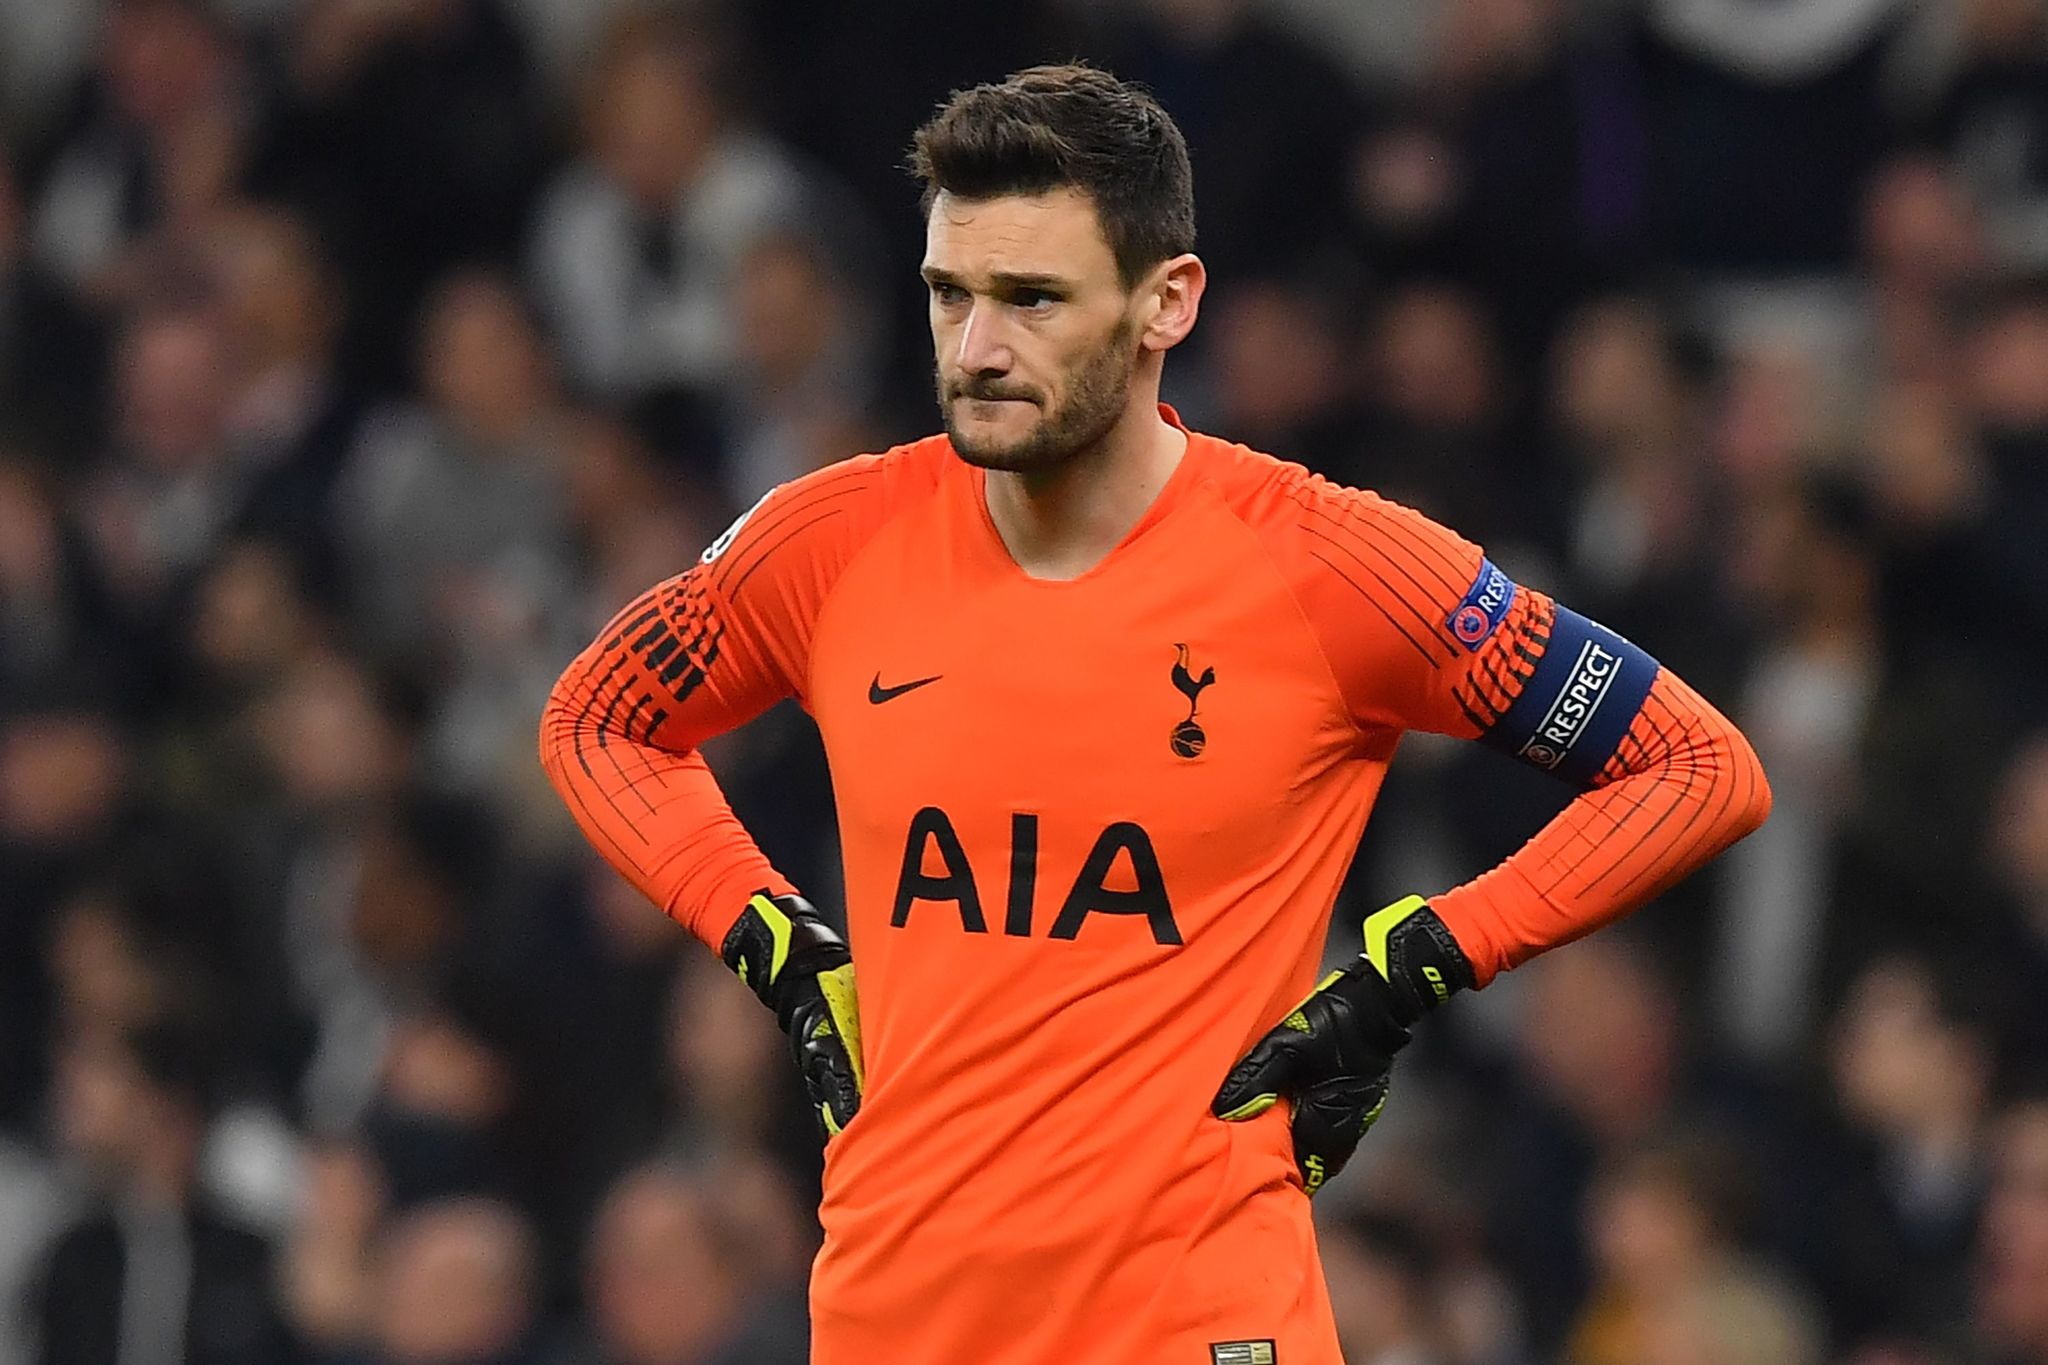 Tottenham Hotspurs French goalkeeper Hugo Lloris looks on during the UEFA Champions League semi-final first leg football match between Tottenham Hotspur and <HIT>Ajax</HIT> at the Tottenham Hotspur Stadium in north London, on April 30, 2019. (Photo by EMMANUEL DUNAND / AFP)